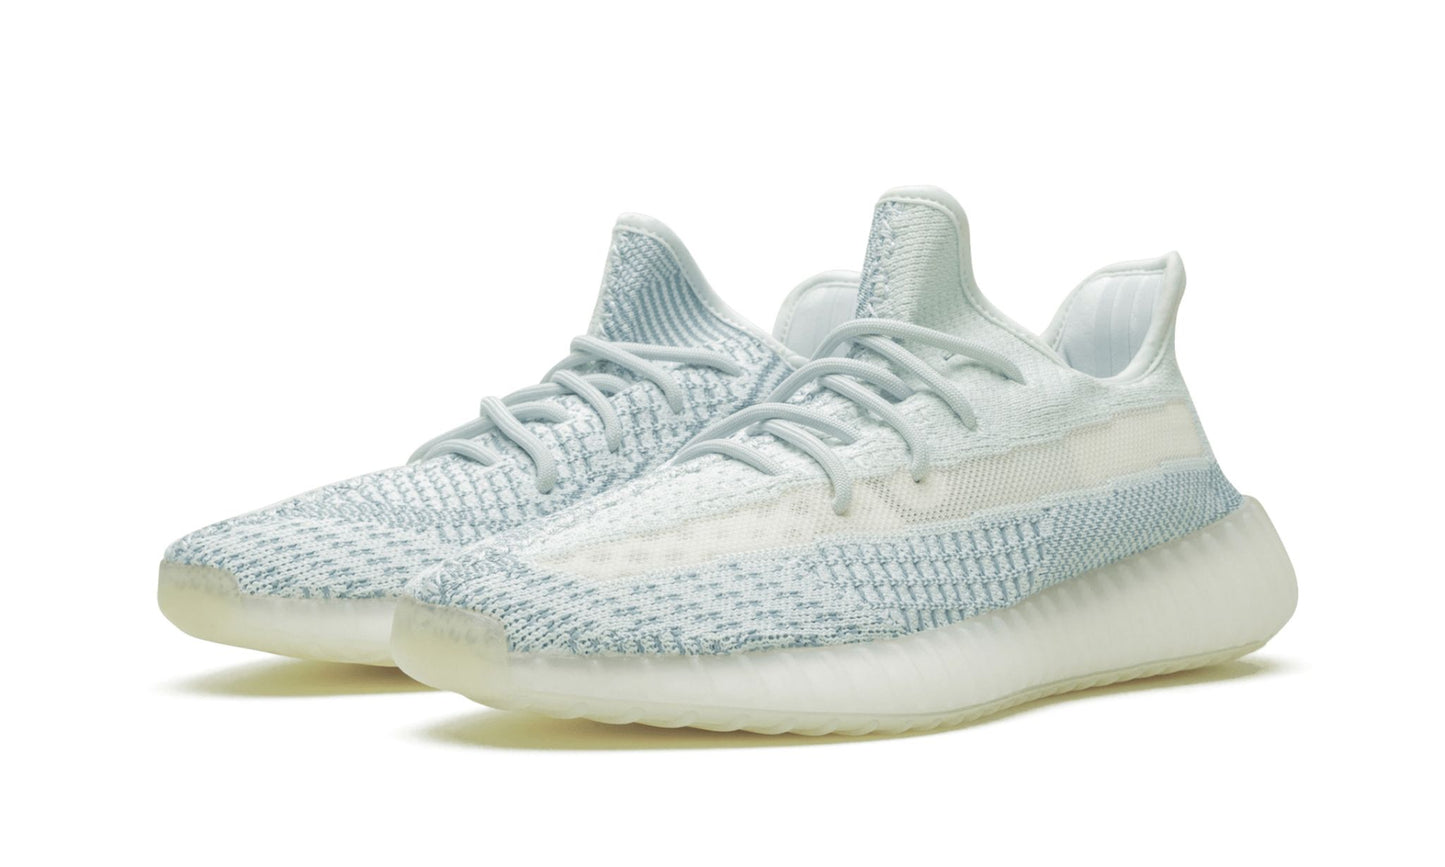 Adidas Yeezy Boost 350 V2 Cloud White